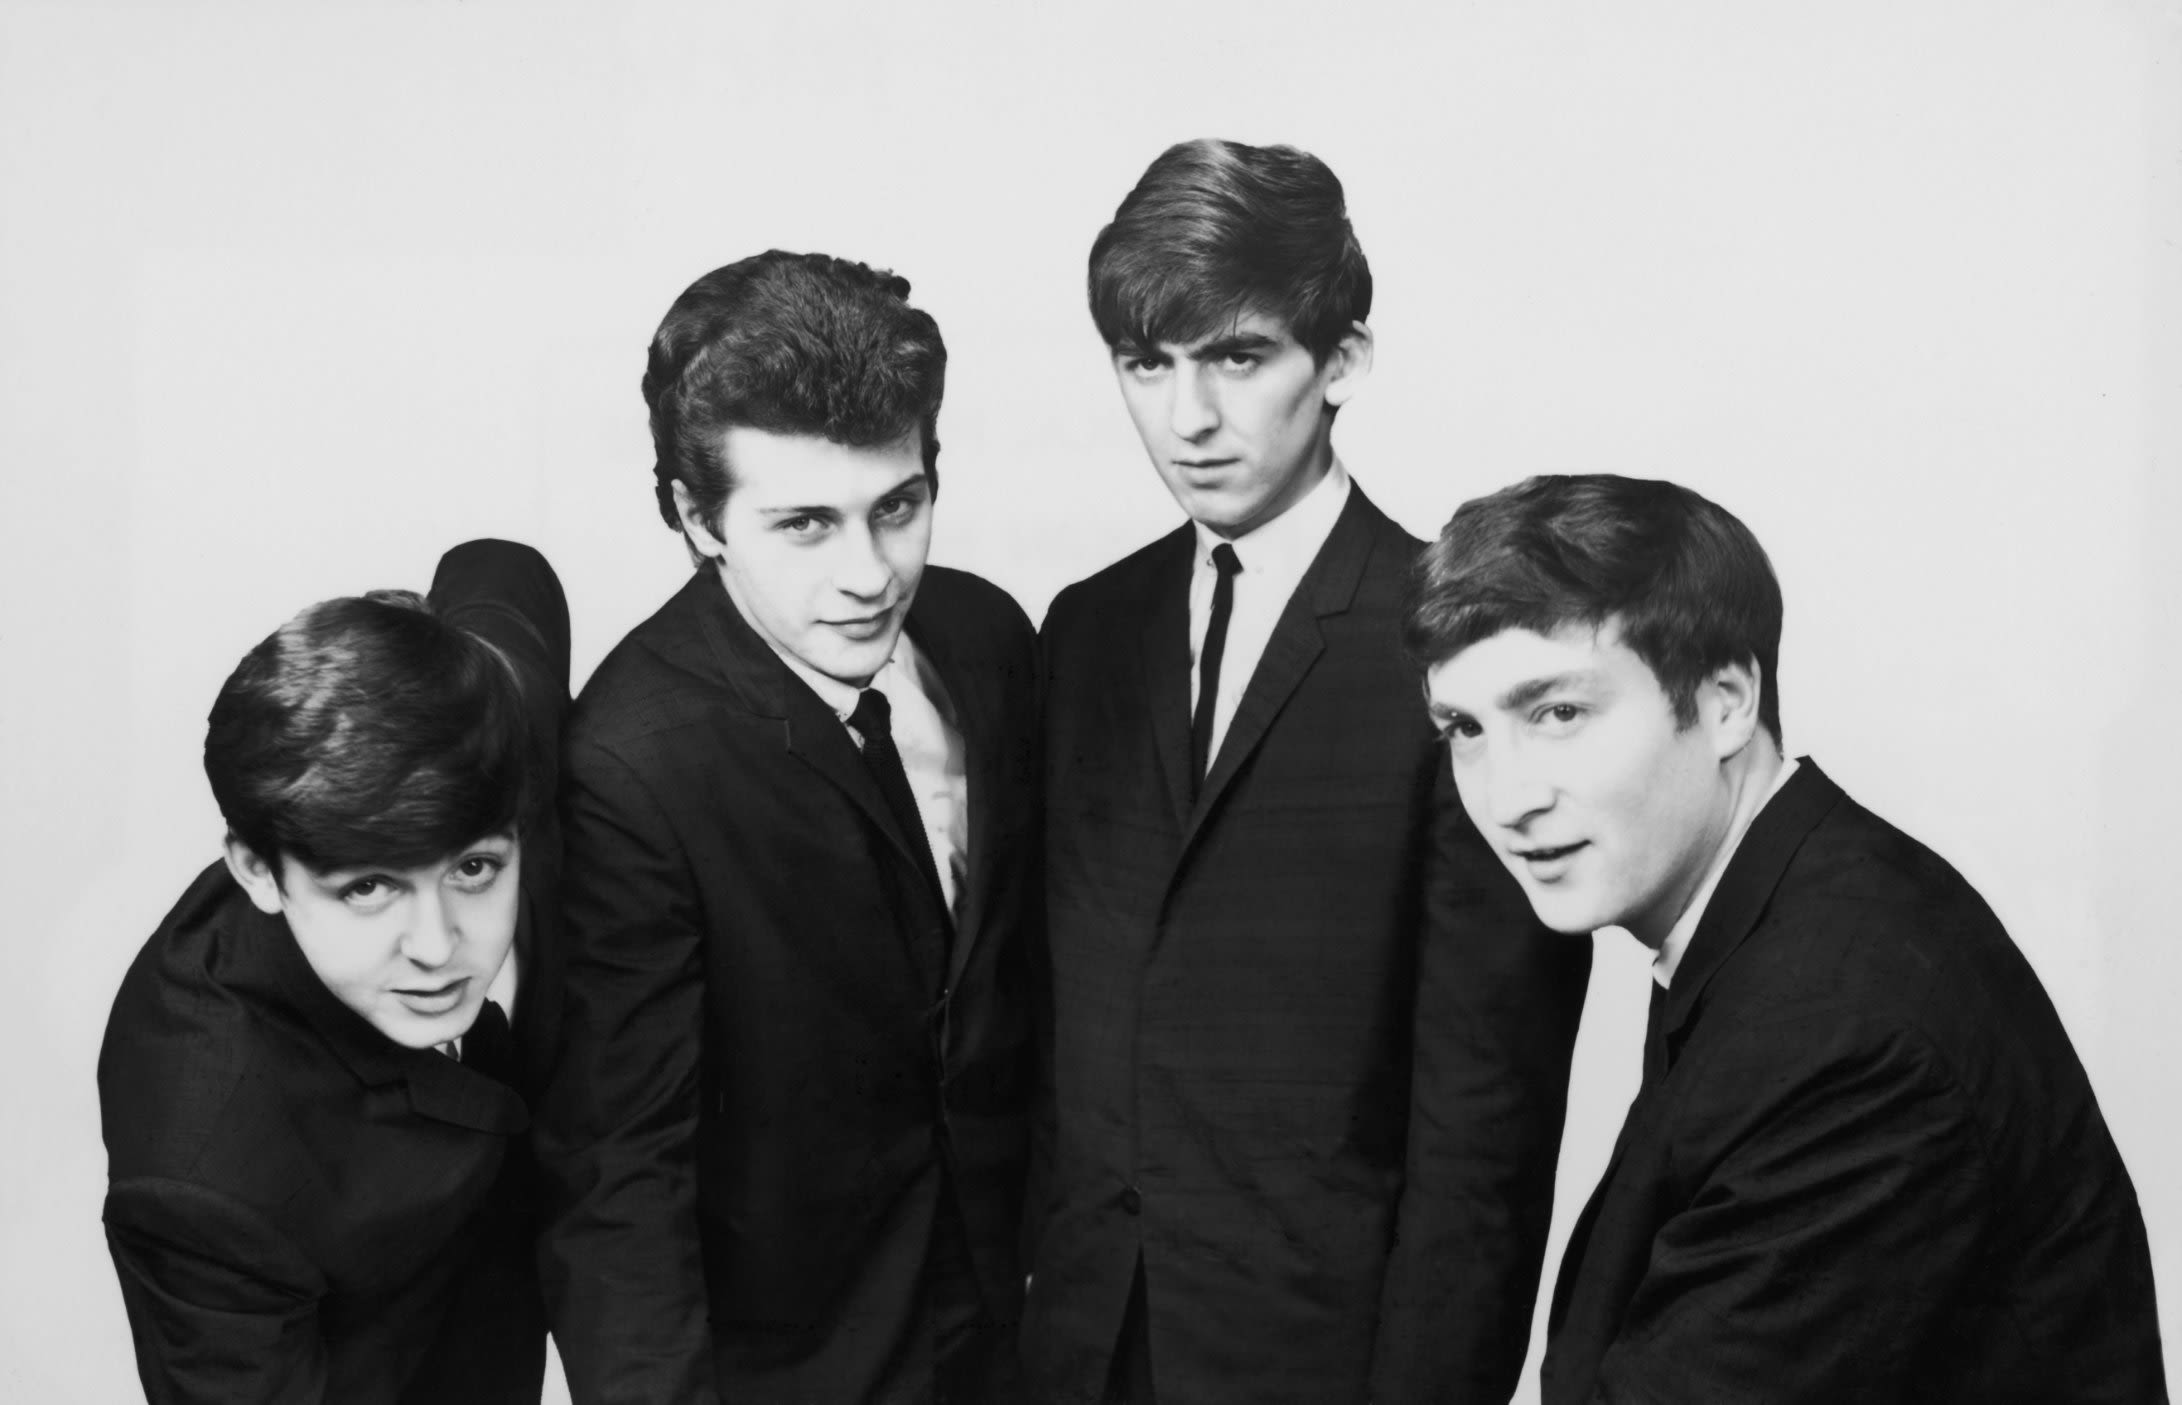 Which Musician Is Often Referred To As The Fifth Beatle